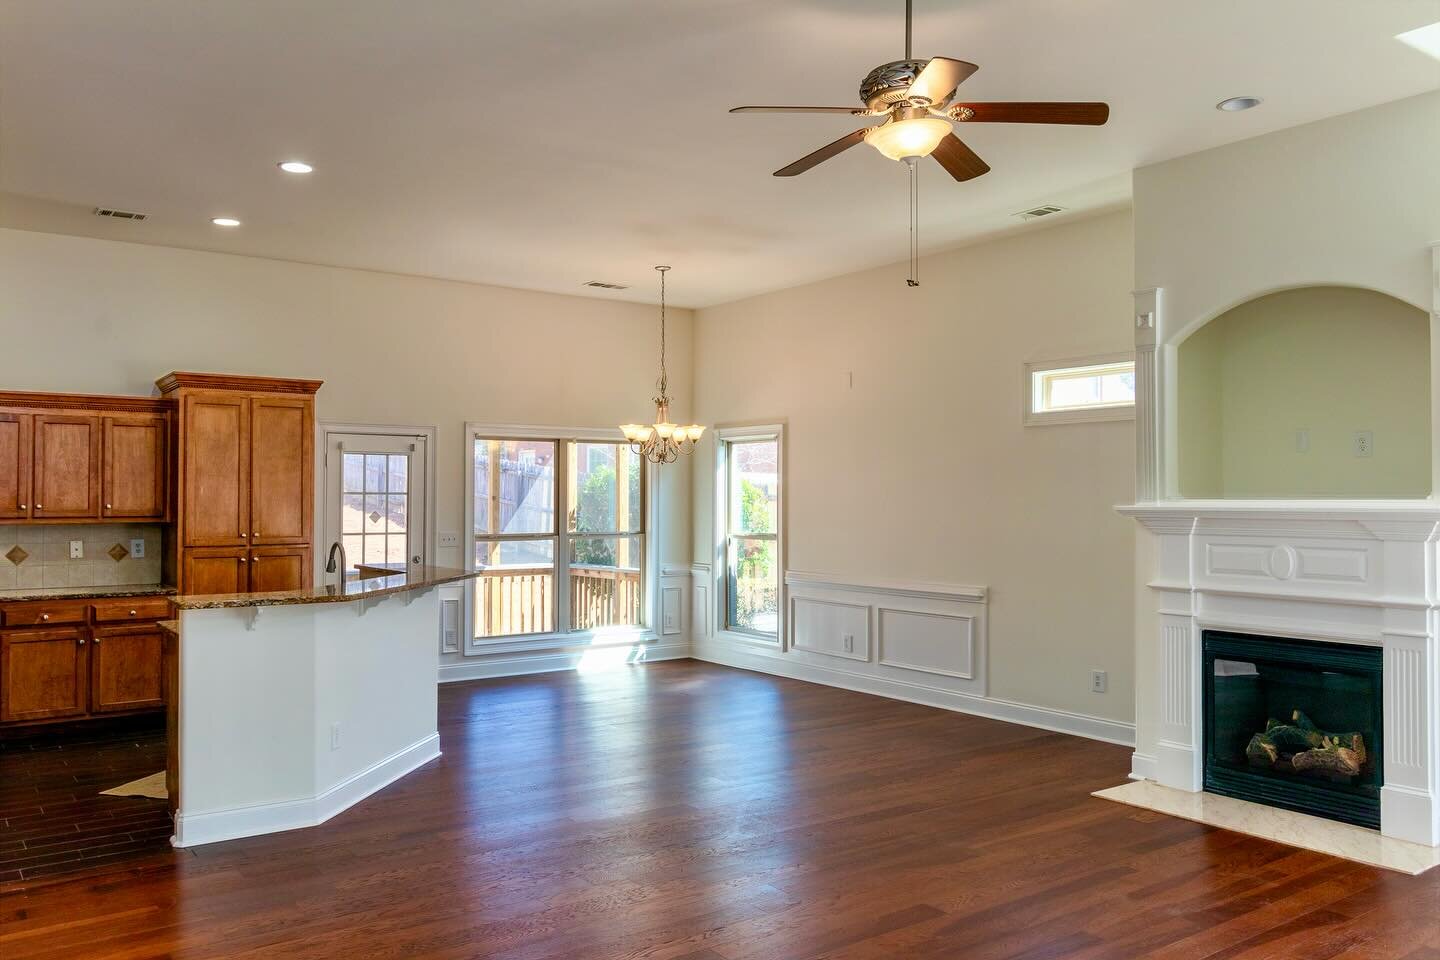 Virtual staging for a real estate listing in Athens GA.